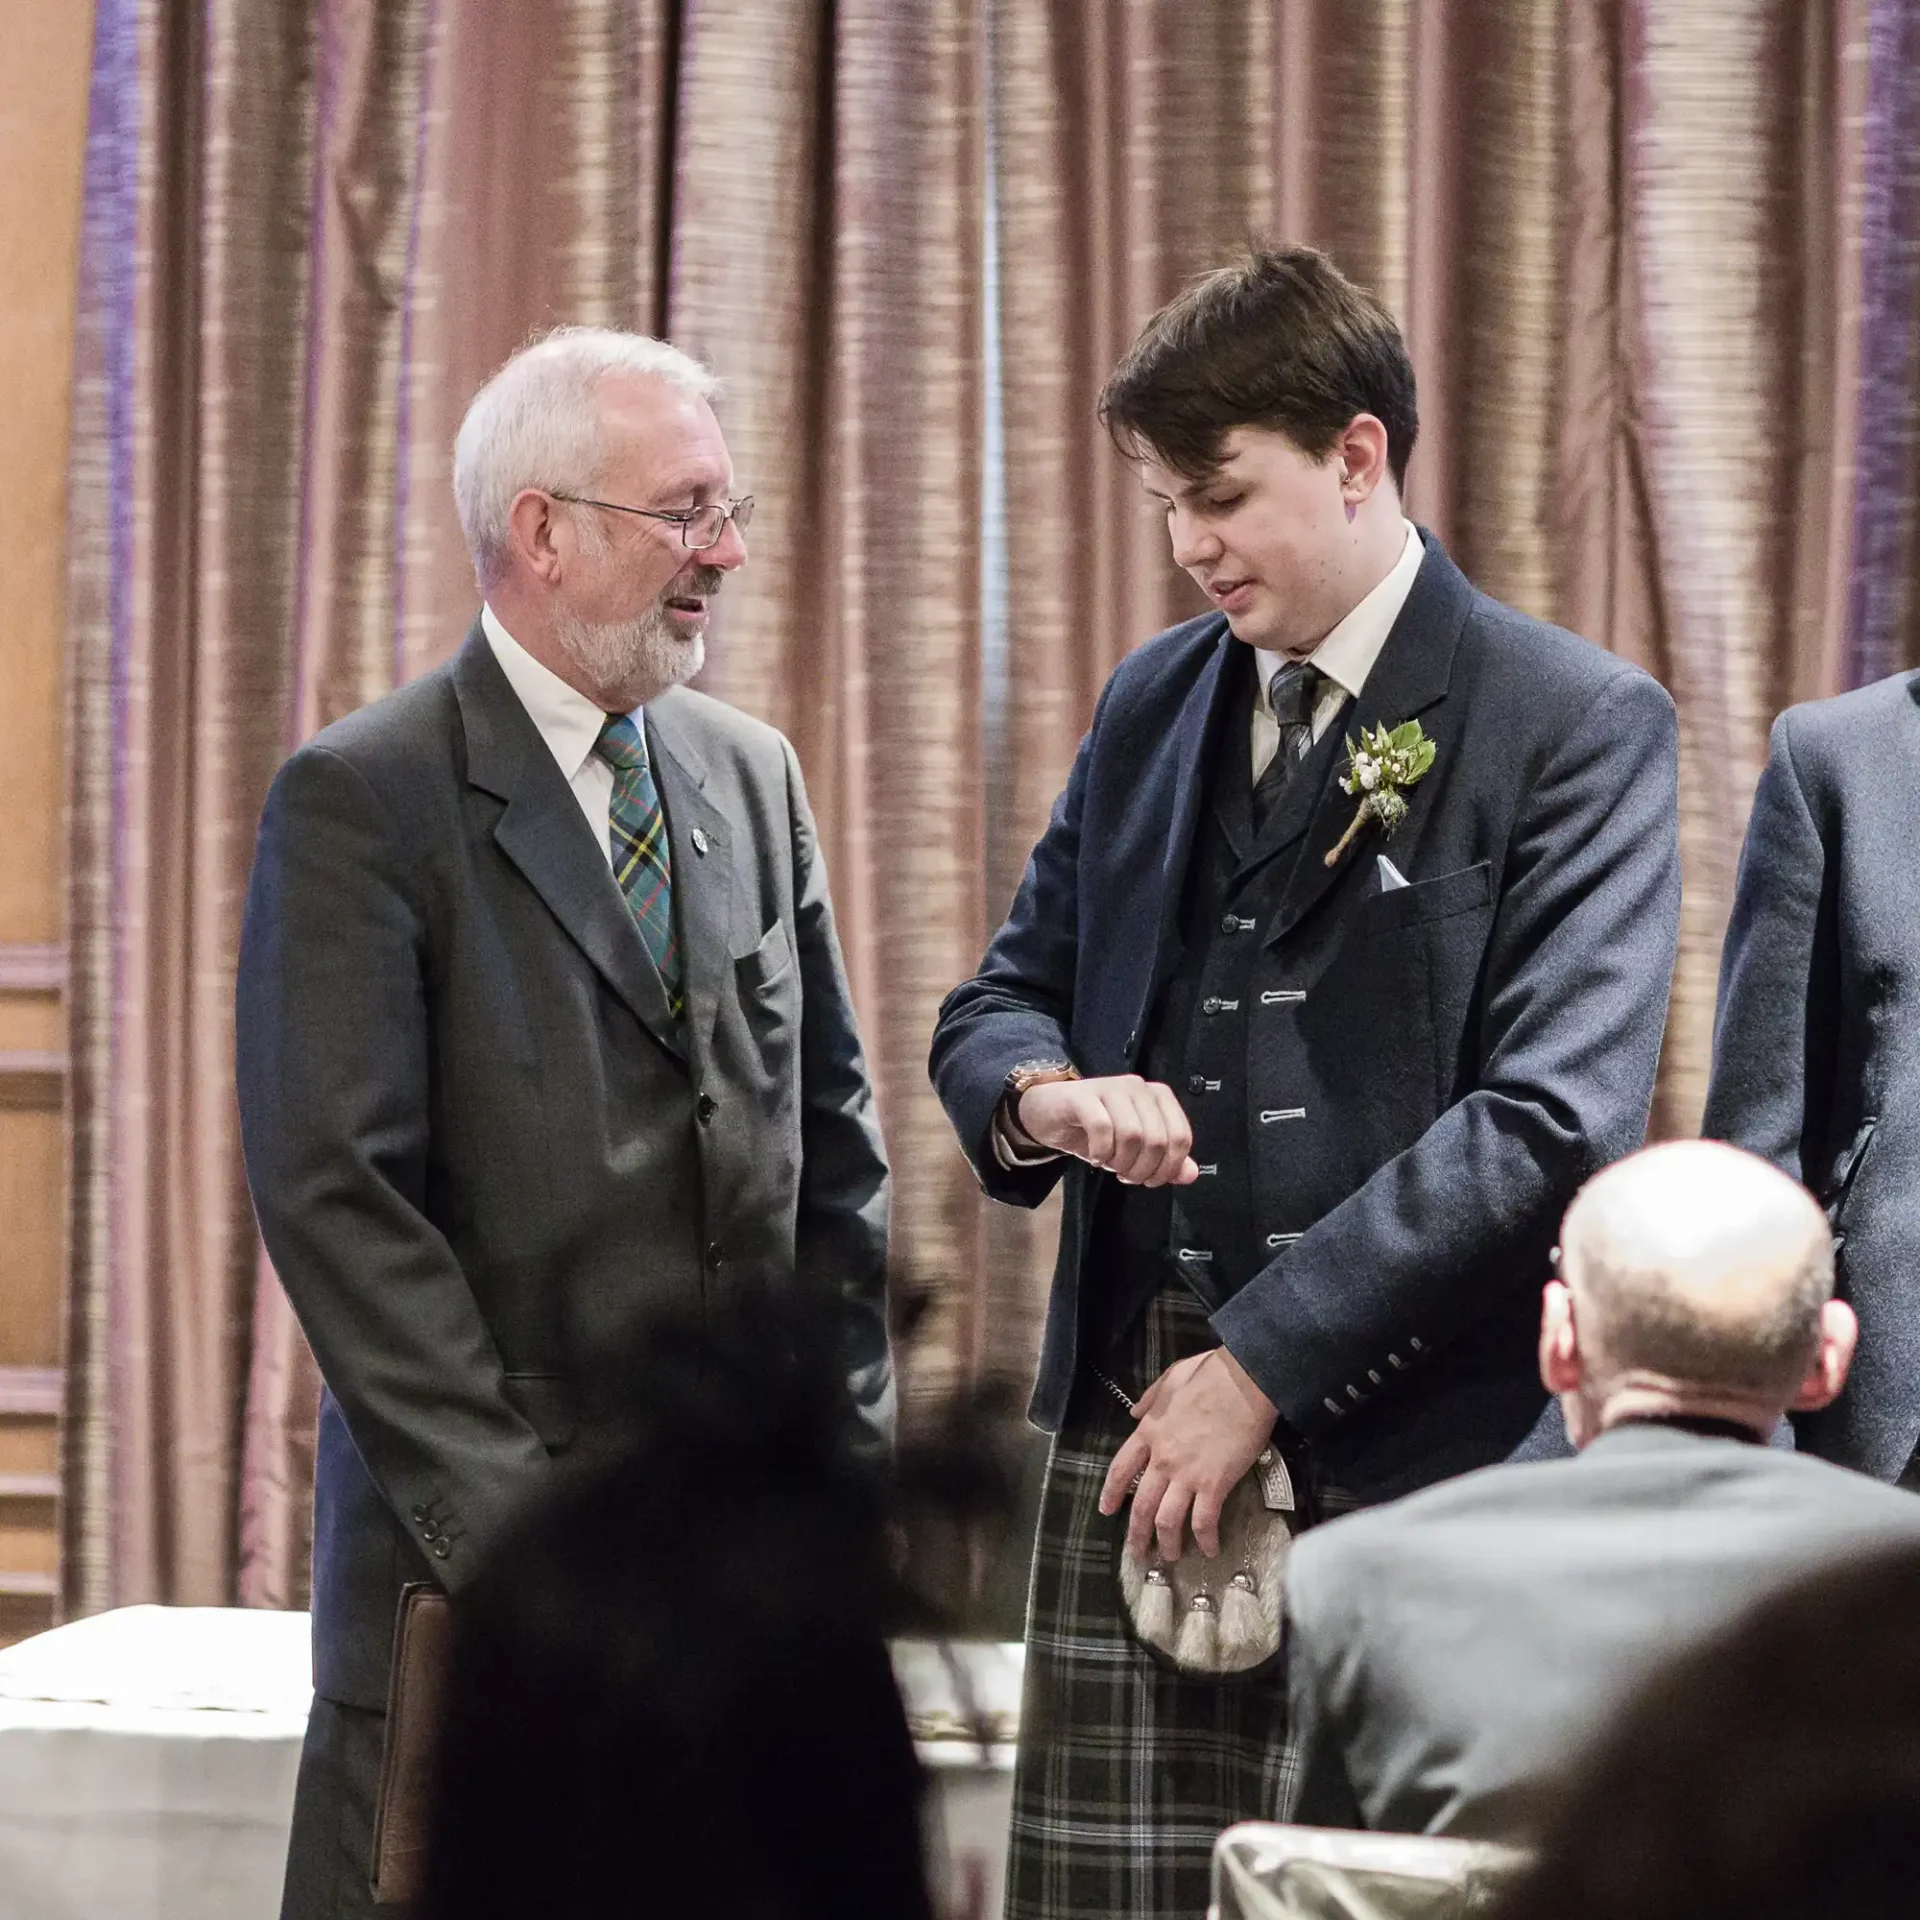 Two men in formal wear, one in a suit and the other in a kilt, smiling and talking at a wedding reception.